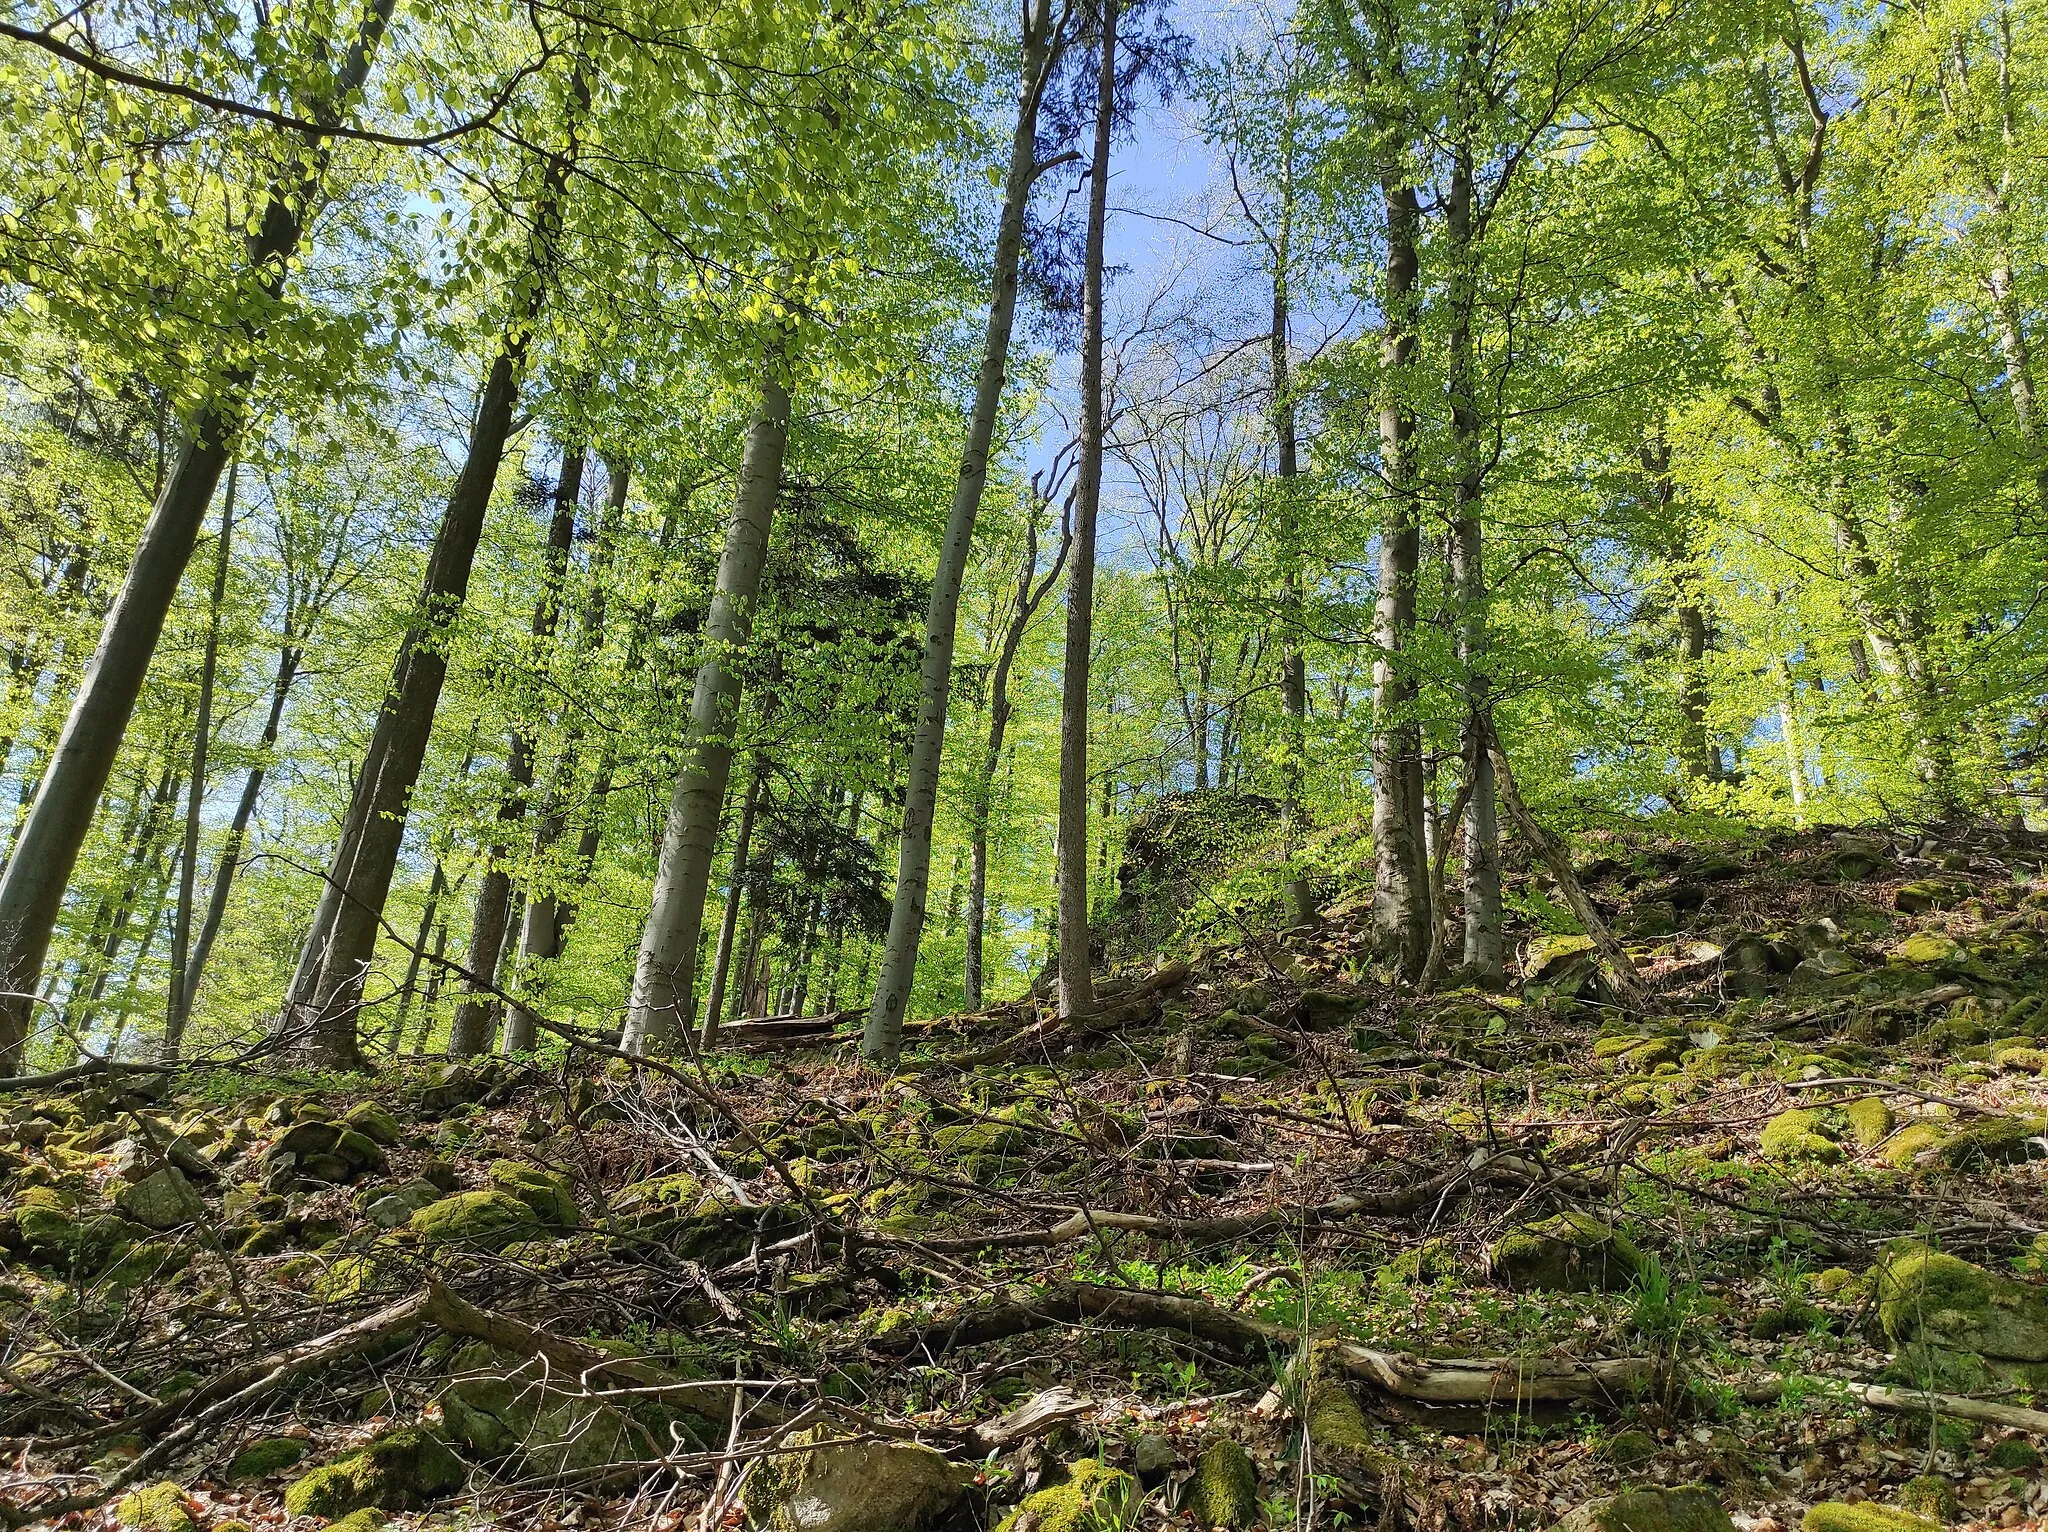 Photo showing: Jaronínská bučina Nature Reserve, a well-preserved remnant of an old herb-rich beech forest and a scree forest in South Bohemian Region, Czechia.